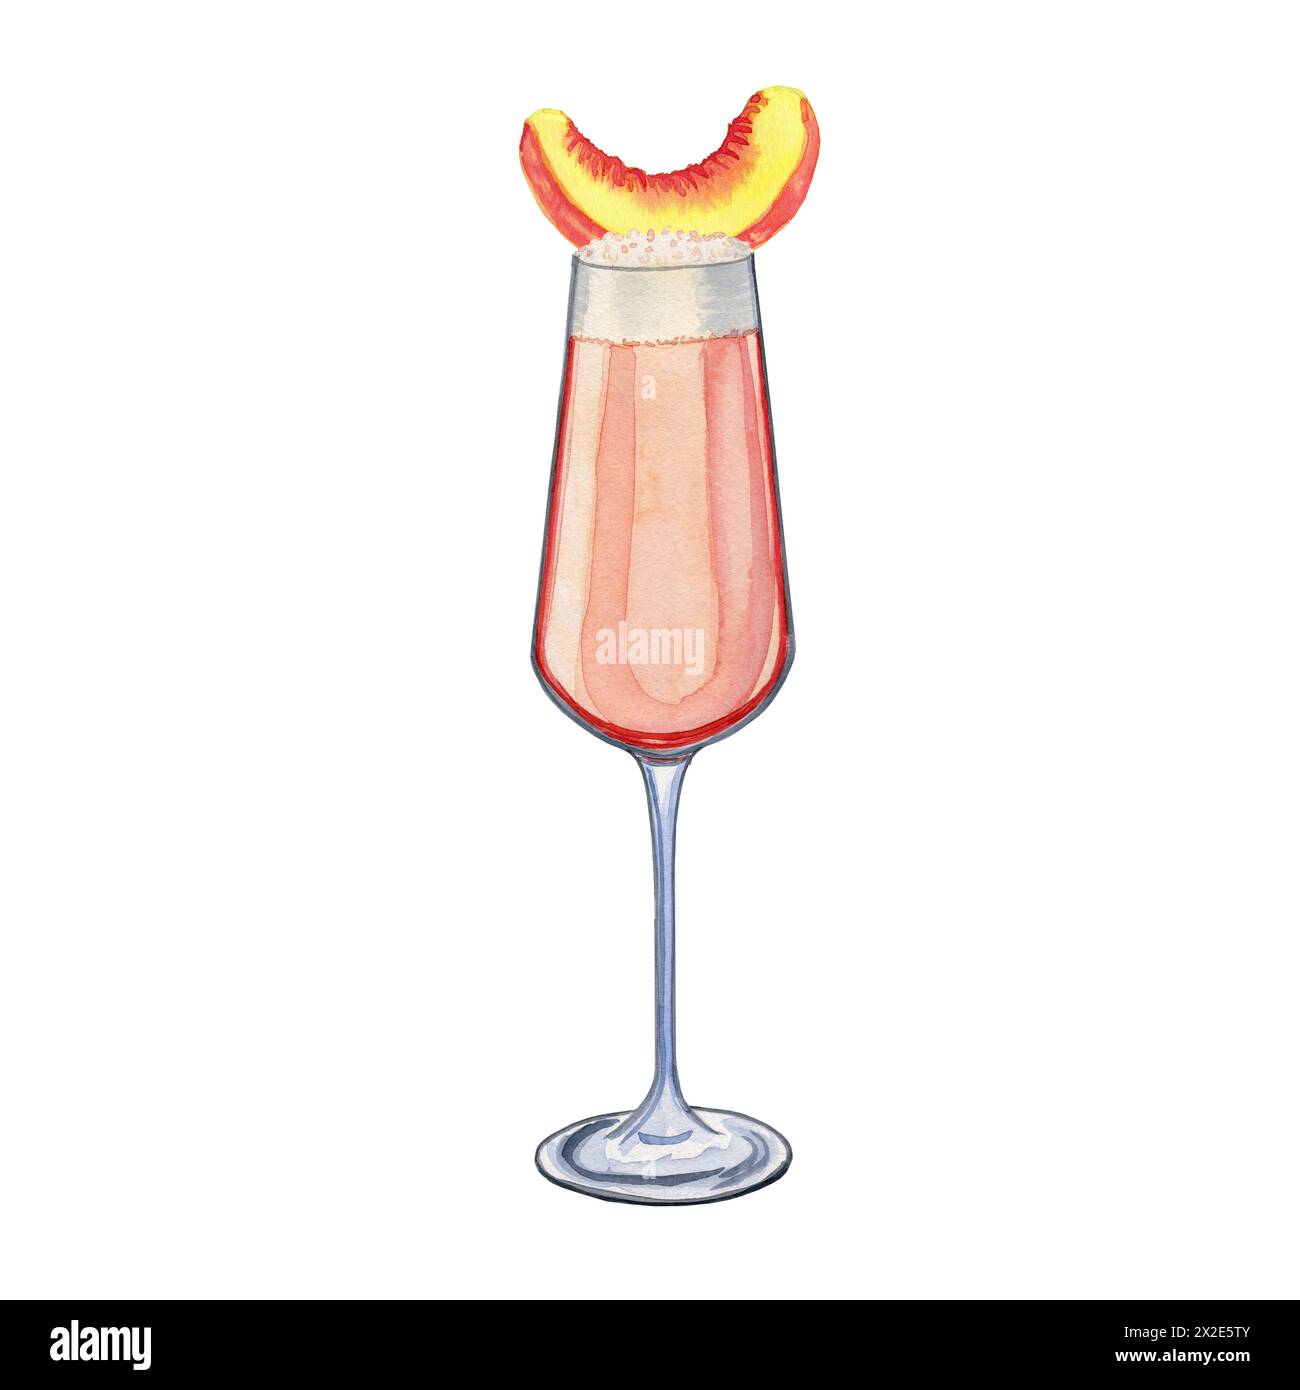 Bellini cocktail watercolor illustration. Hand drawn image of an alcoholic drink in a glass garnished with a piece of peach on an isolated background. Stock Photo